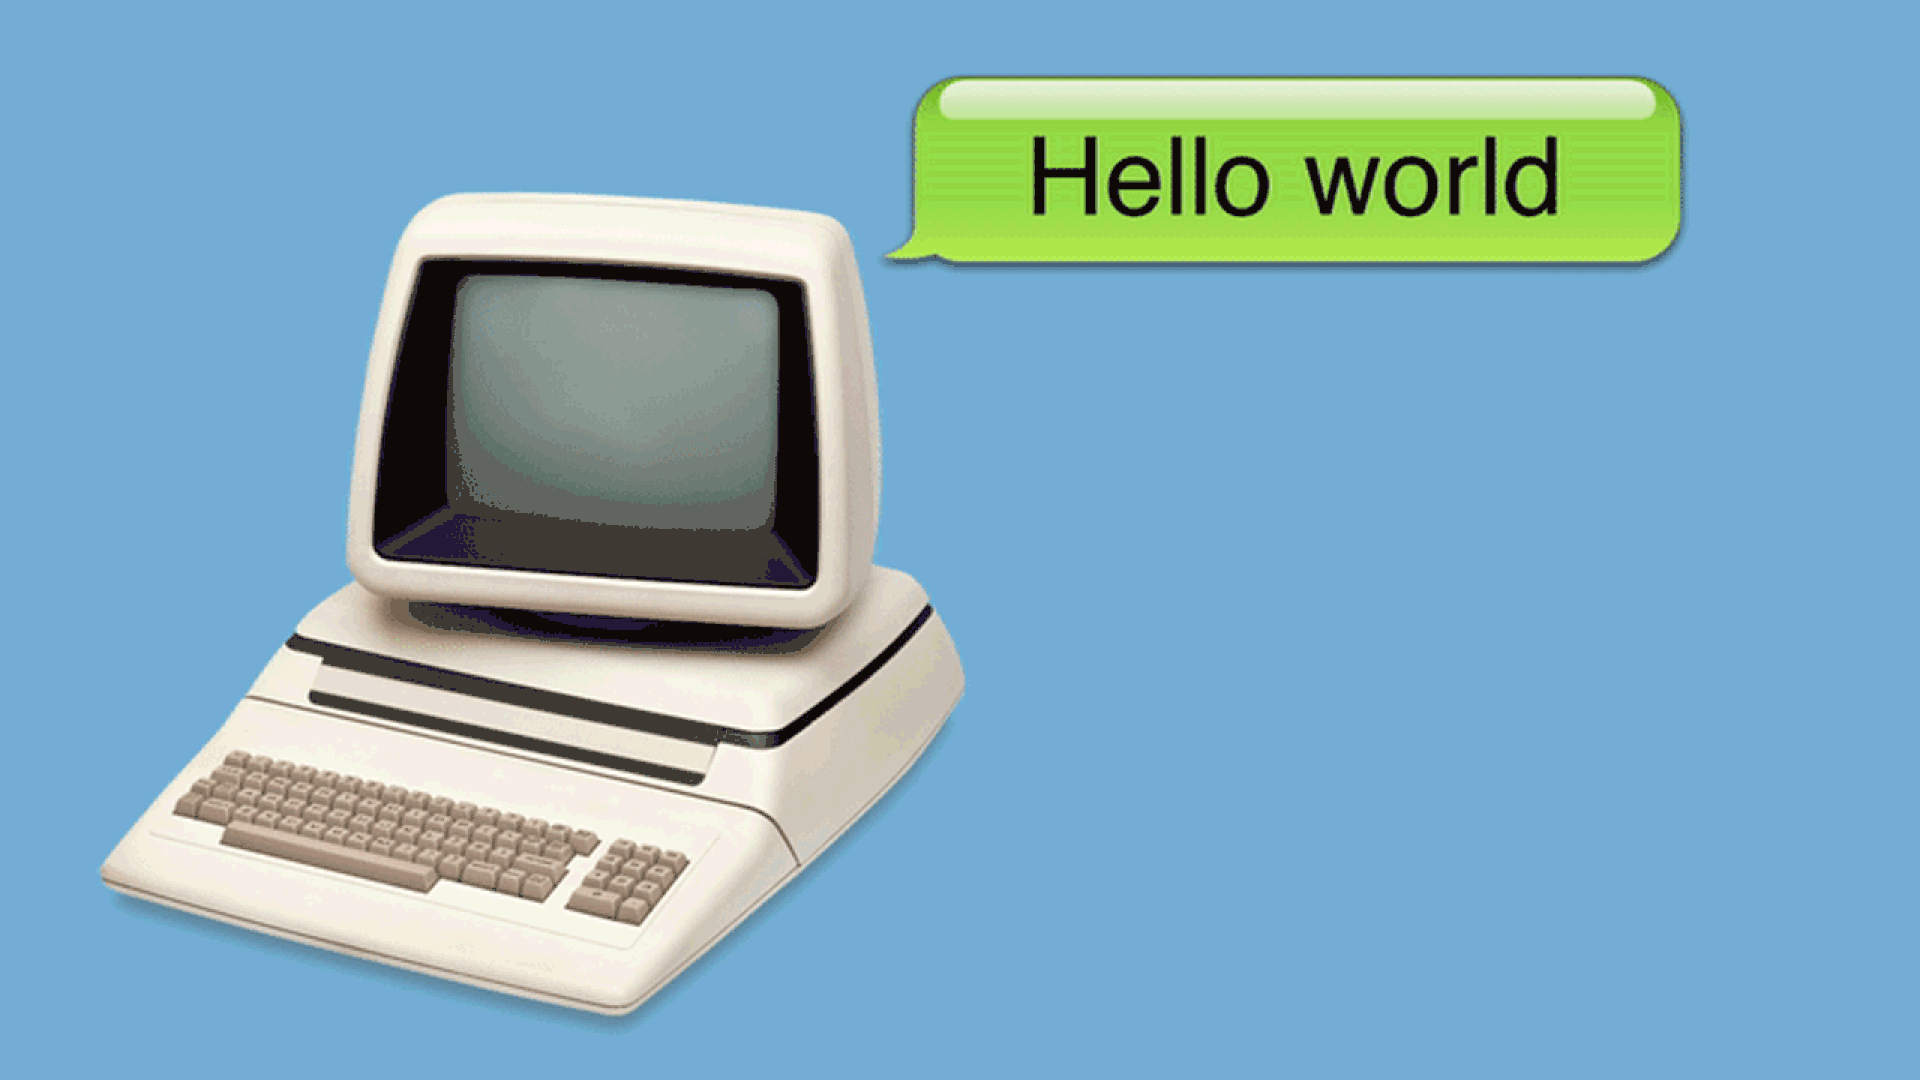 A sentient computer saying 'Hello World' in English, Chinese and Russian.